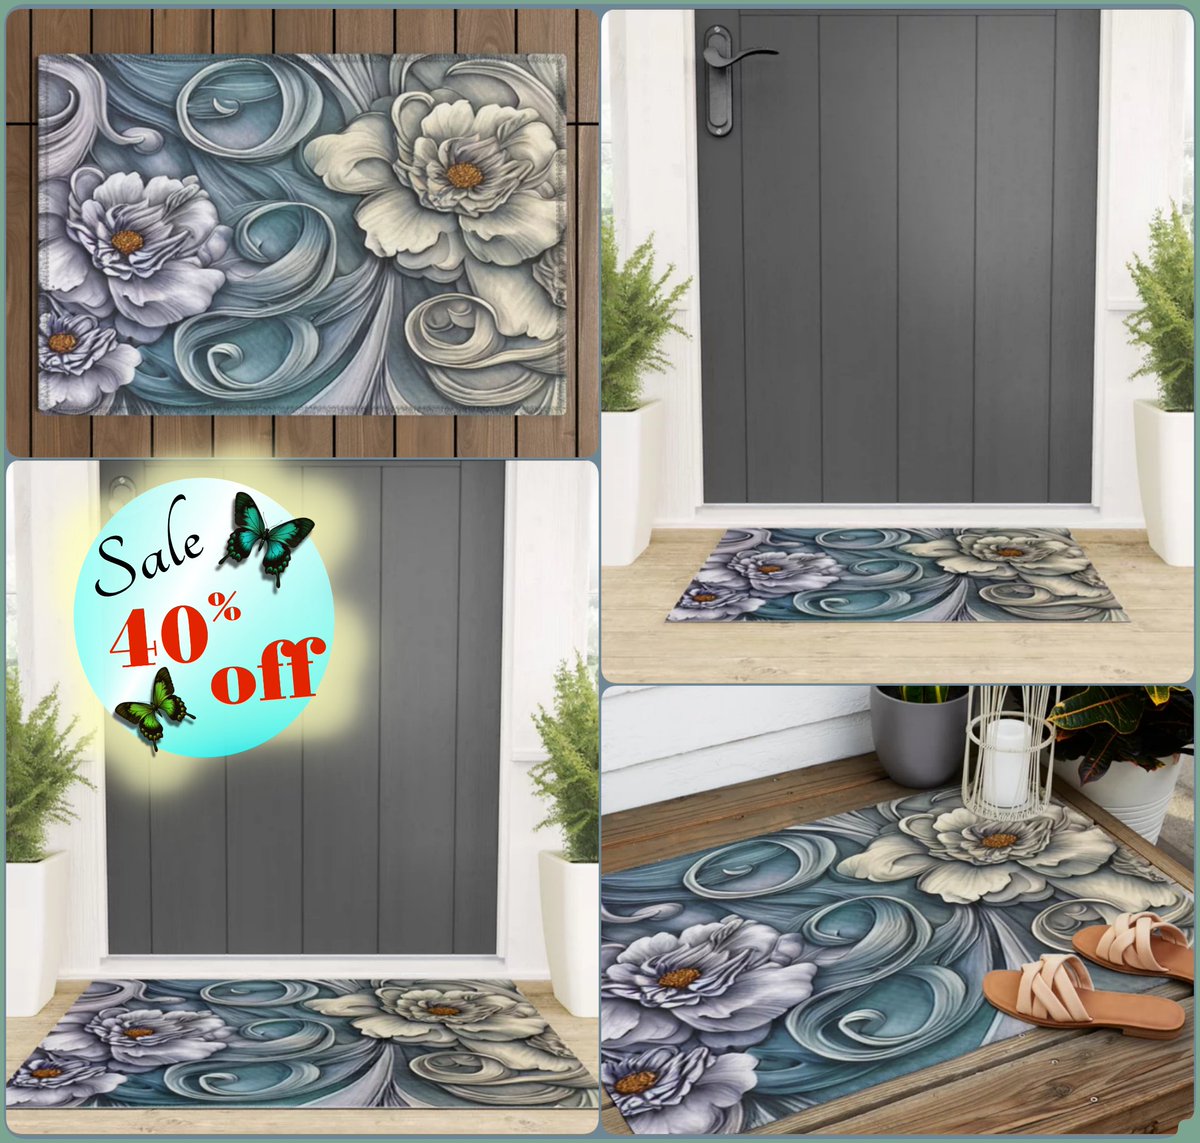 *SALE 40% Off* Balanced Beauty Welcome Mat~by Art_Falaxy ~Refreshingly Unique~ #artfalaxy #art #rugs #mats #homedecor #society6 #Society6max #swirls #modern #trendy #accents #floorrugs #welcome #outdoorrugs society6.com/product/balanc…